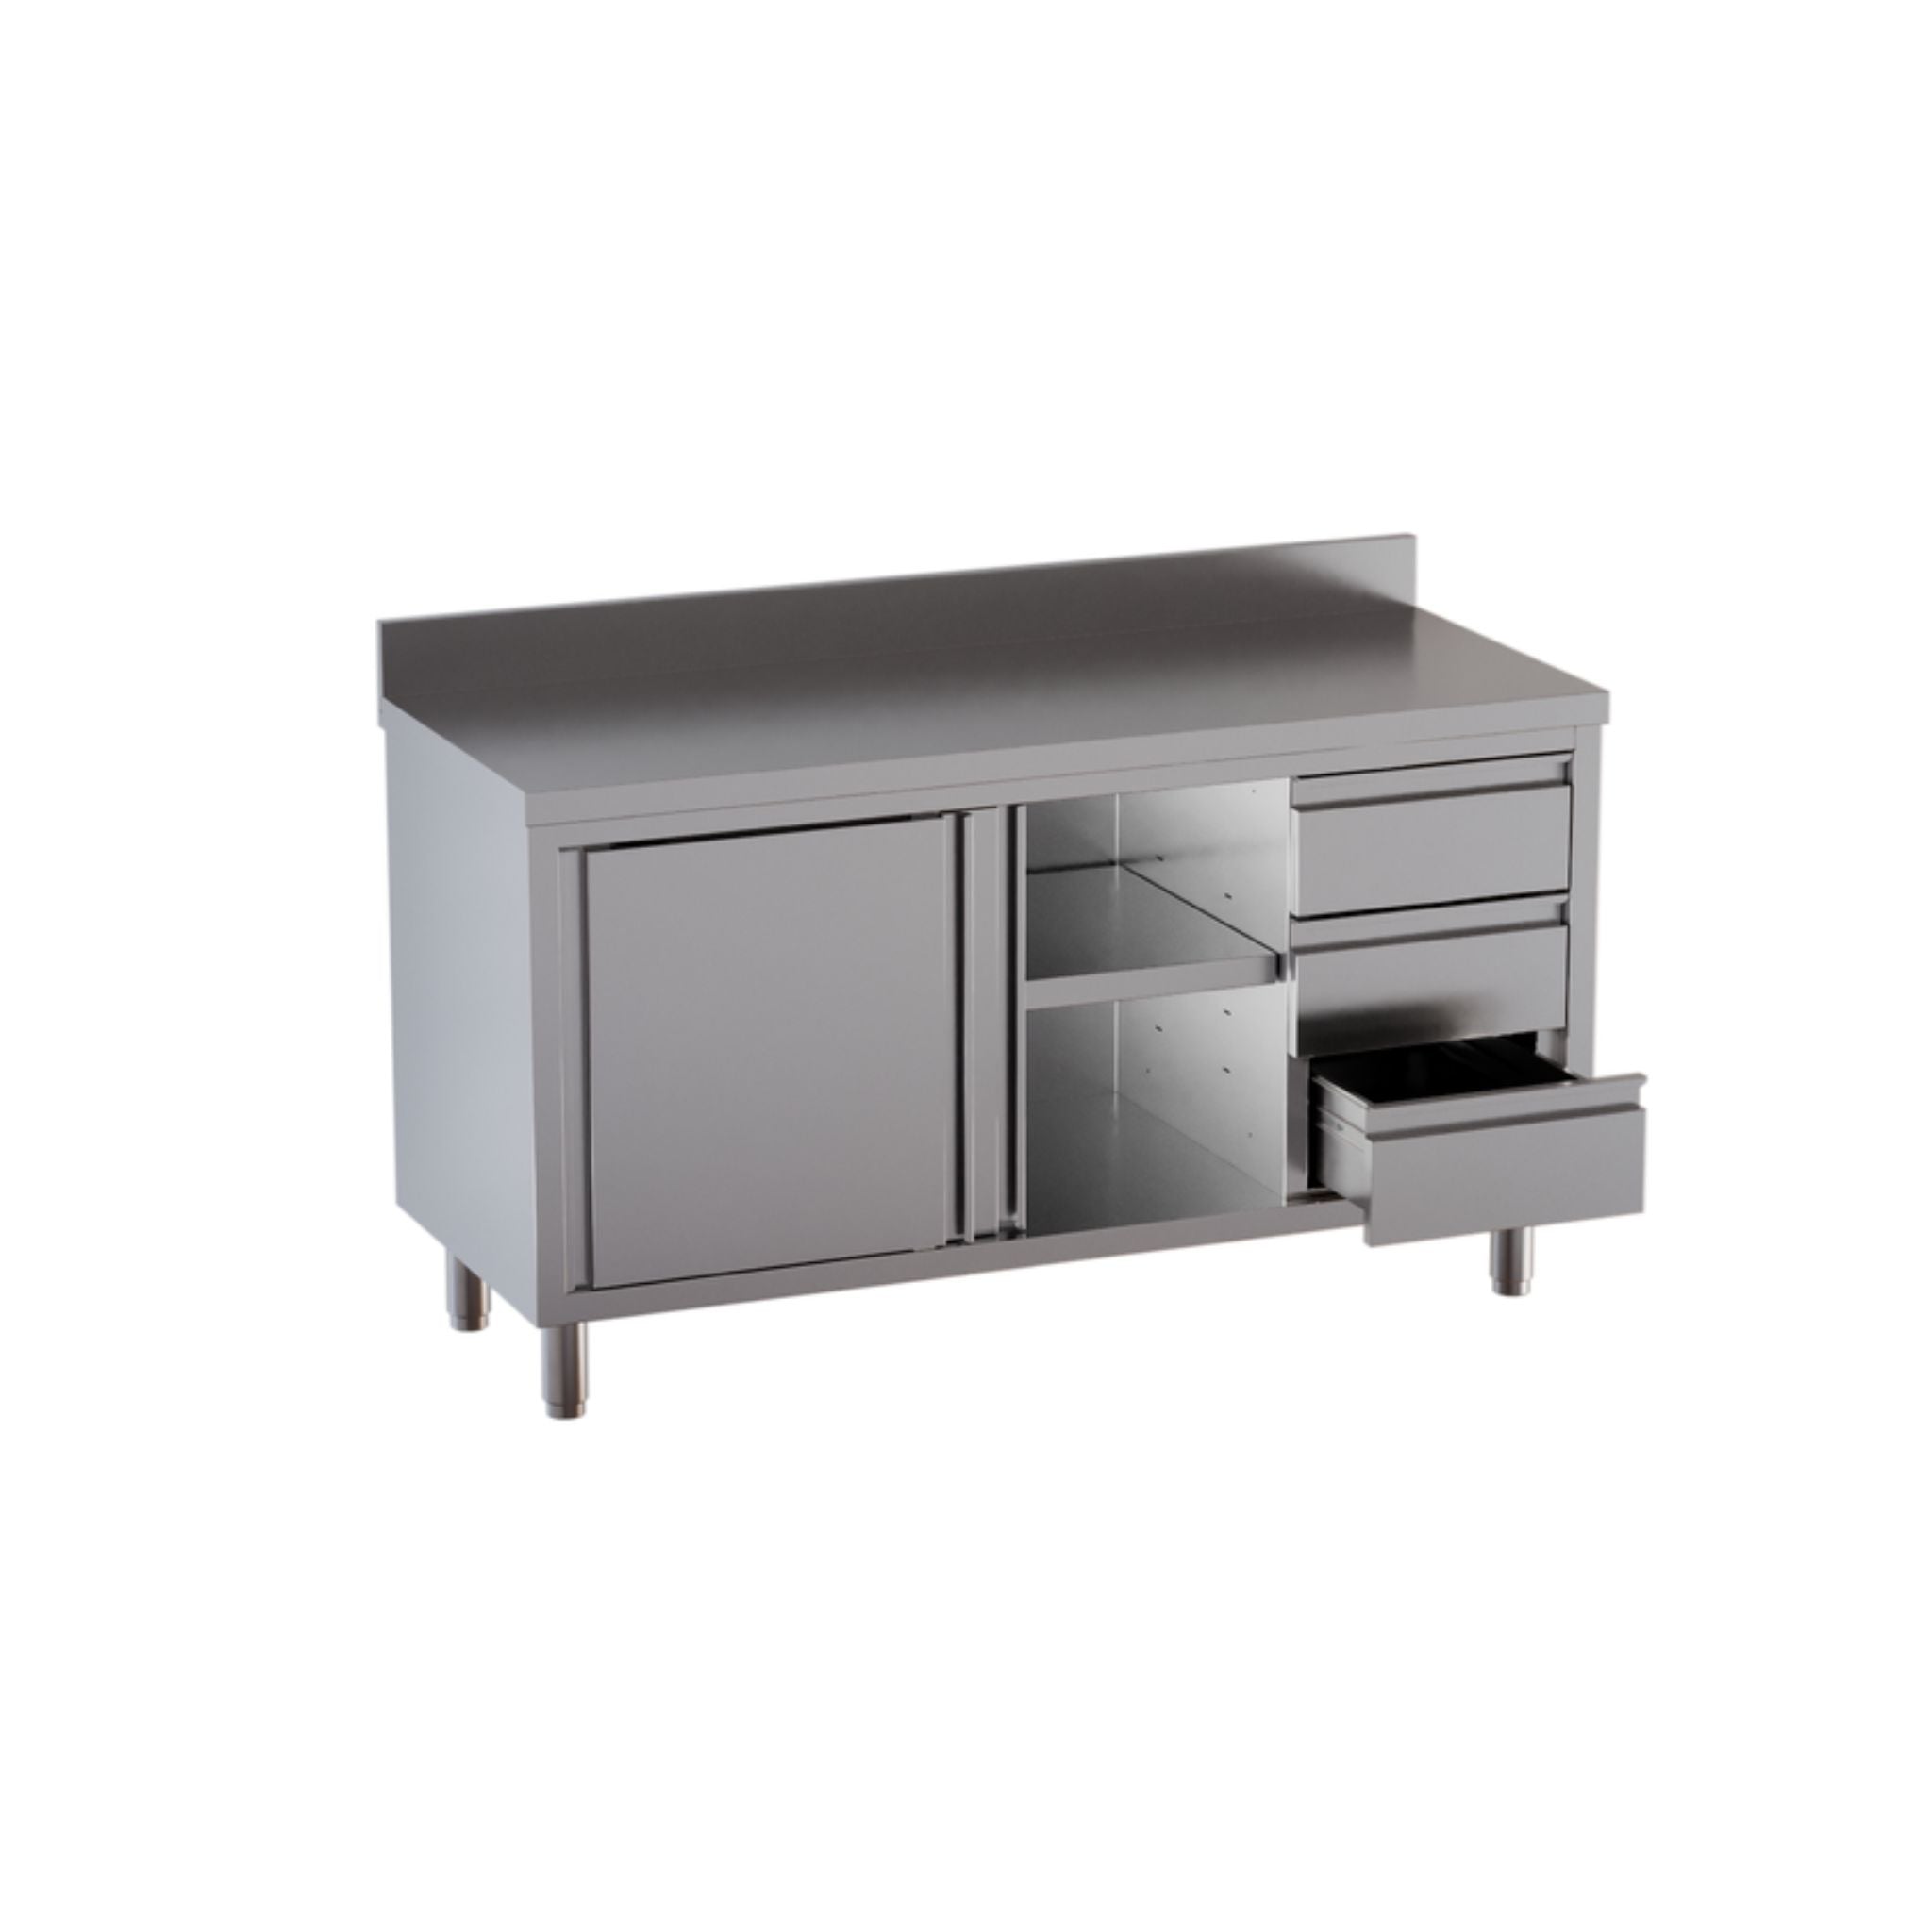 Standard stainless steel work cabinet with hinged doors or sliding doors and 3 drawers